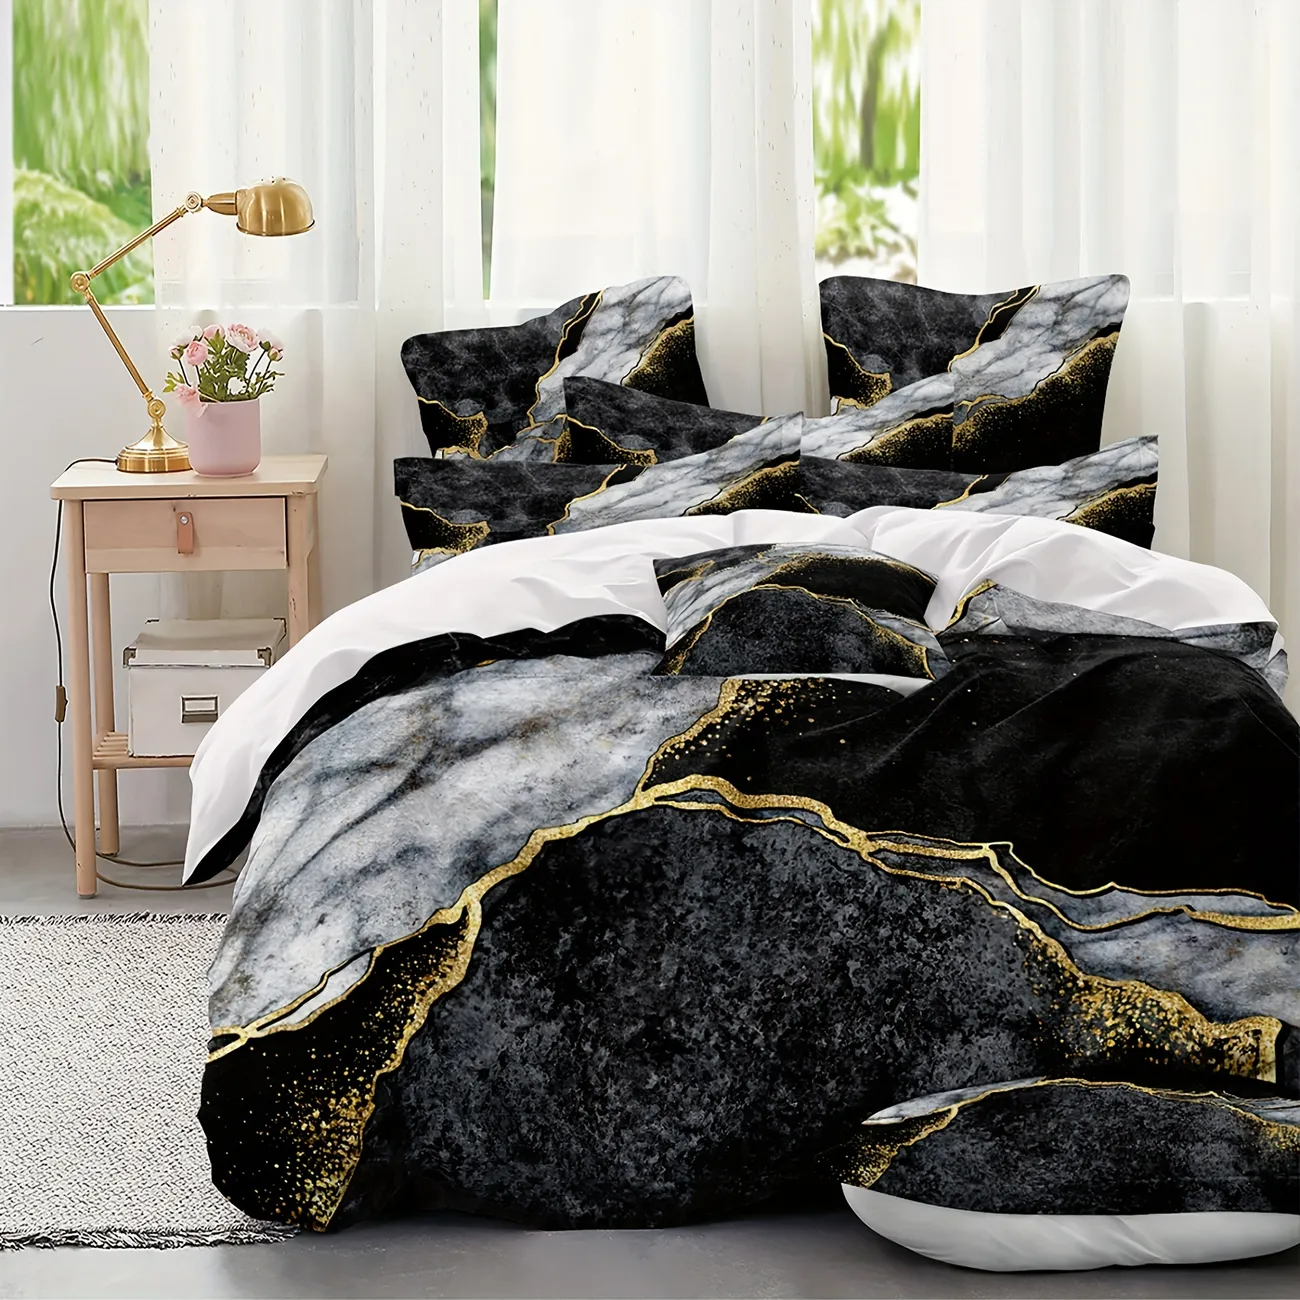 2/3pcs Soft and Comfortable Marble Print Microfiber Duvet Cover Set with Washable Pillowcases - Perfect for Bedroom and Guest Room (1 Duvet Cover + 1/2 Pillowcase, Core Not Included)